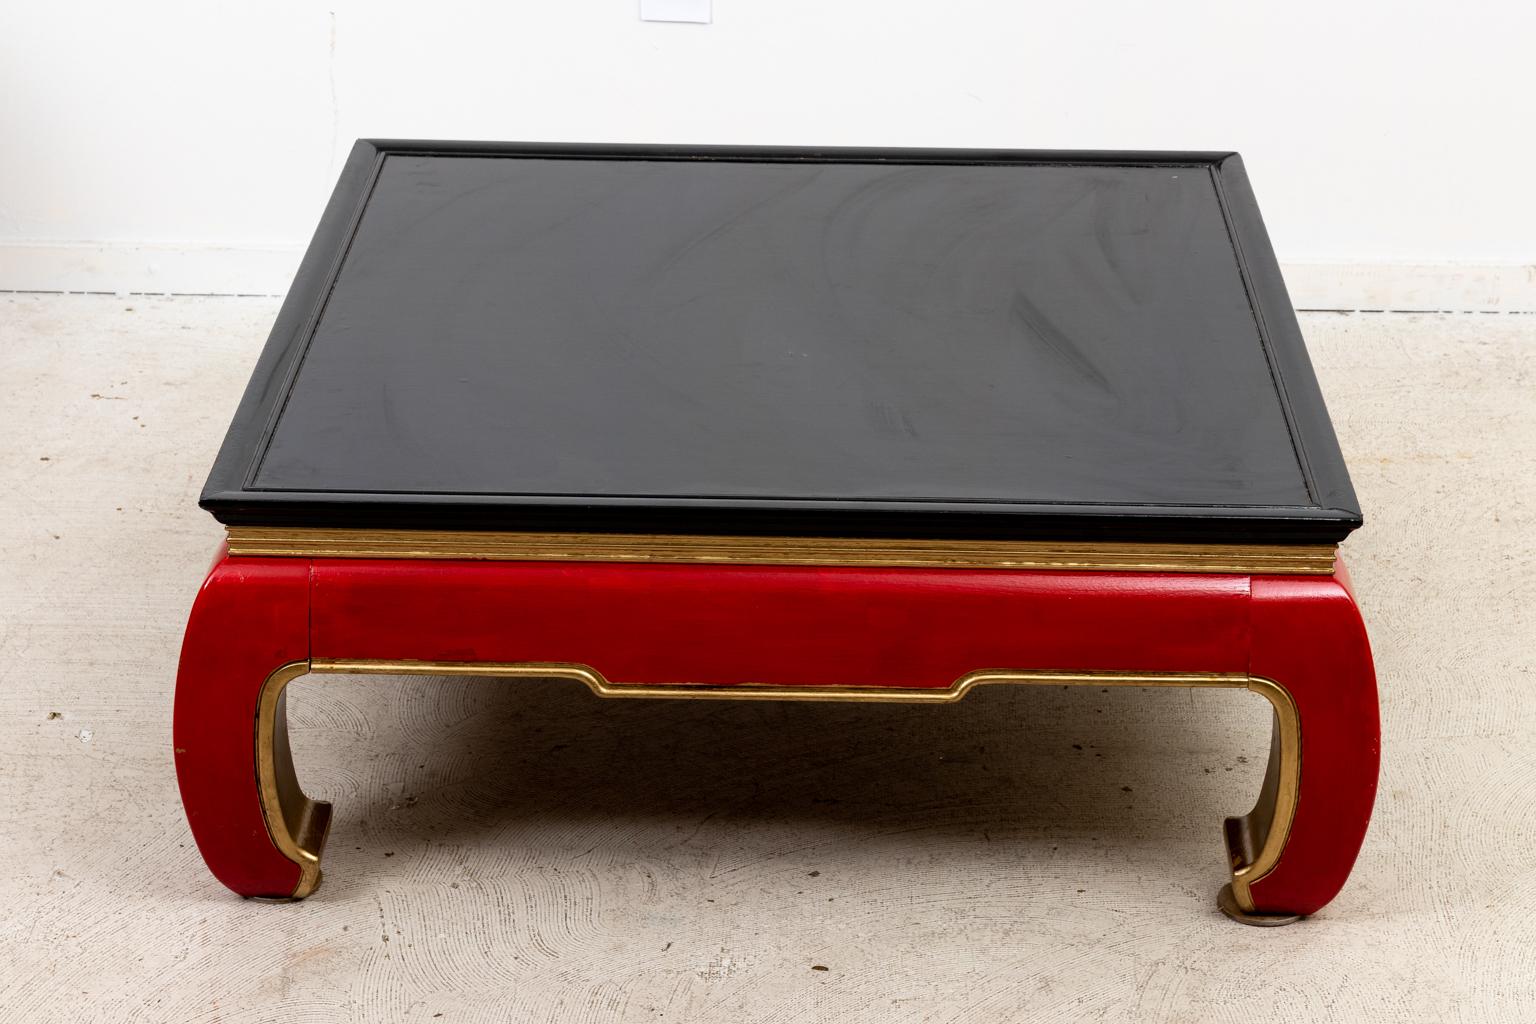 Circa 1960-1980s Asian style square coffee table which has been repainted at some point in black, red, and gold. Please note of wear consistent with age including some wear to painted finish but good overall finish.